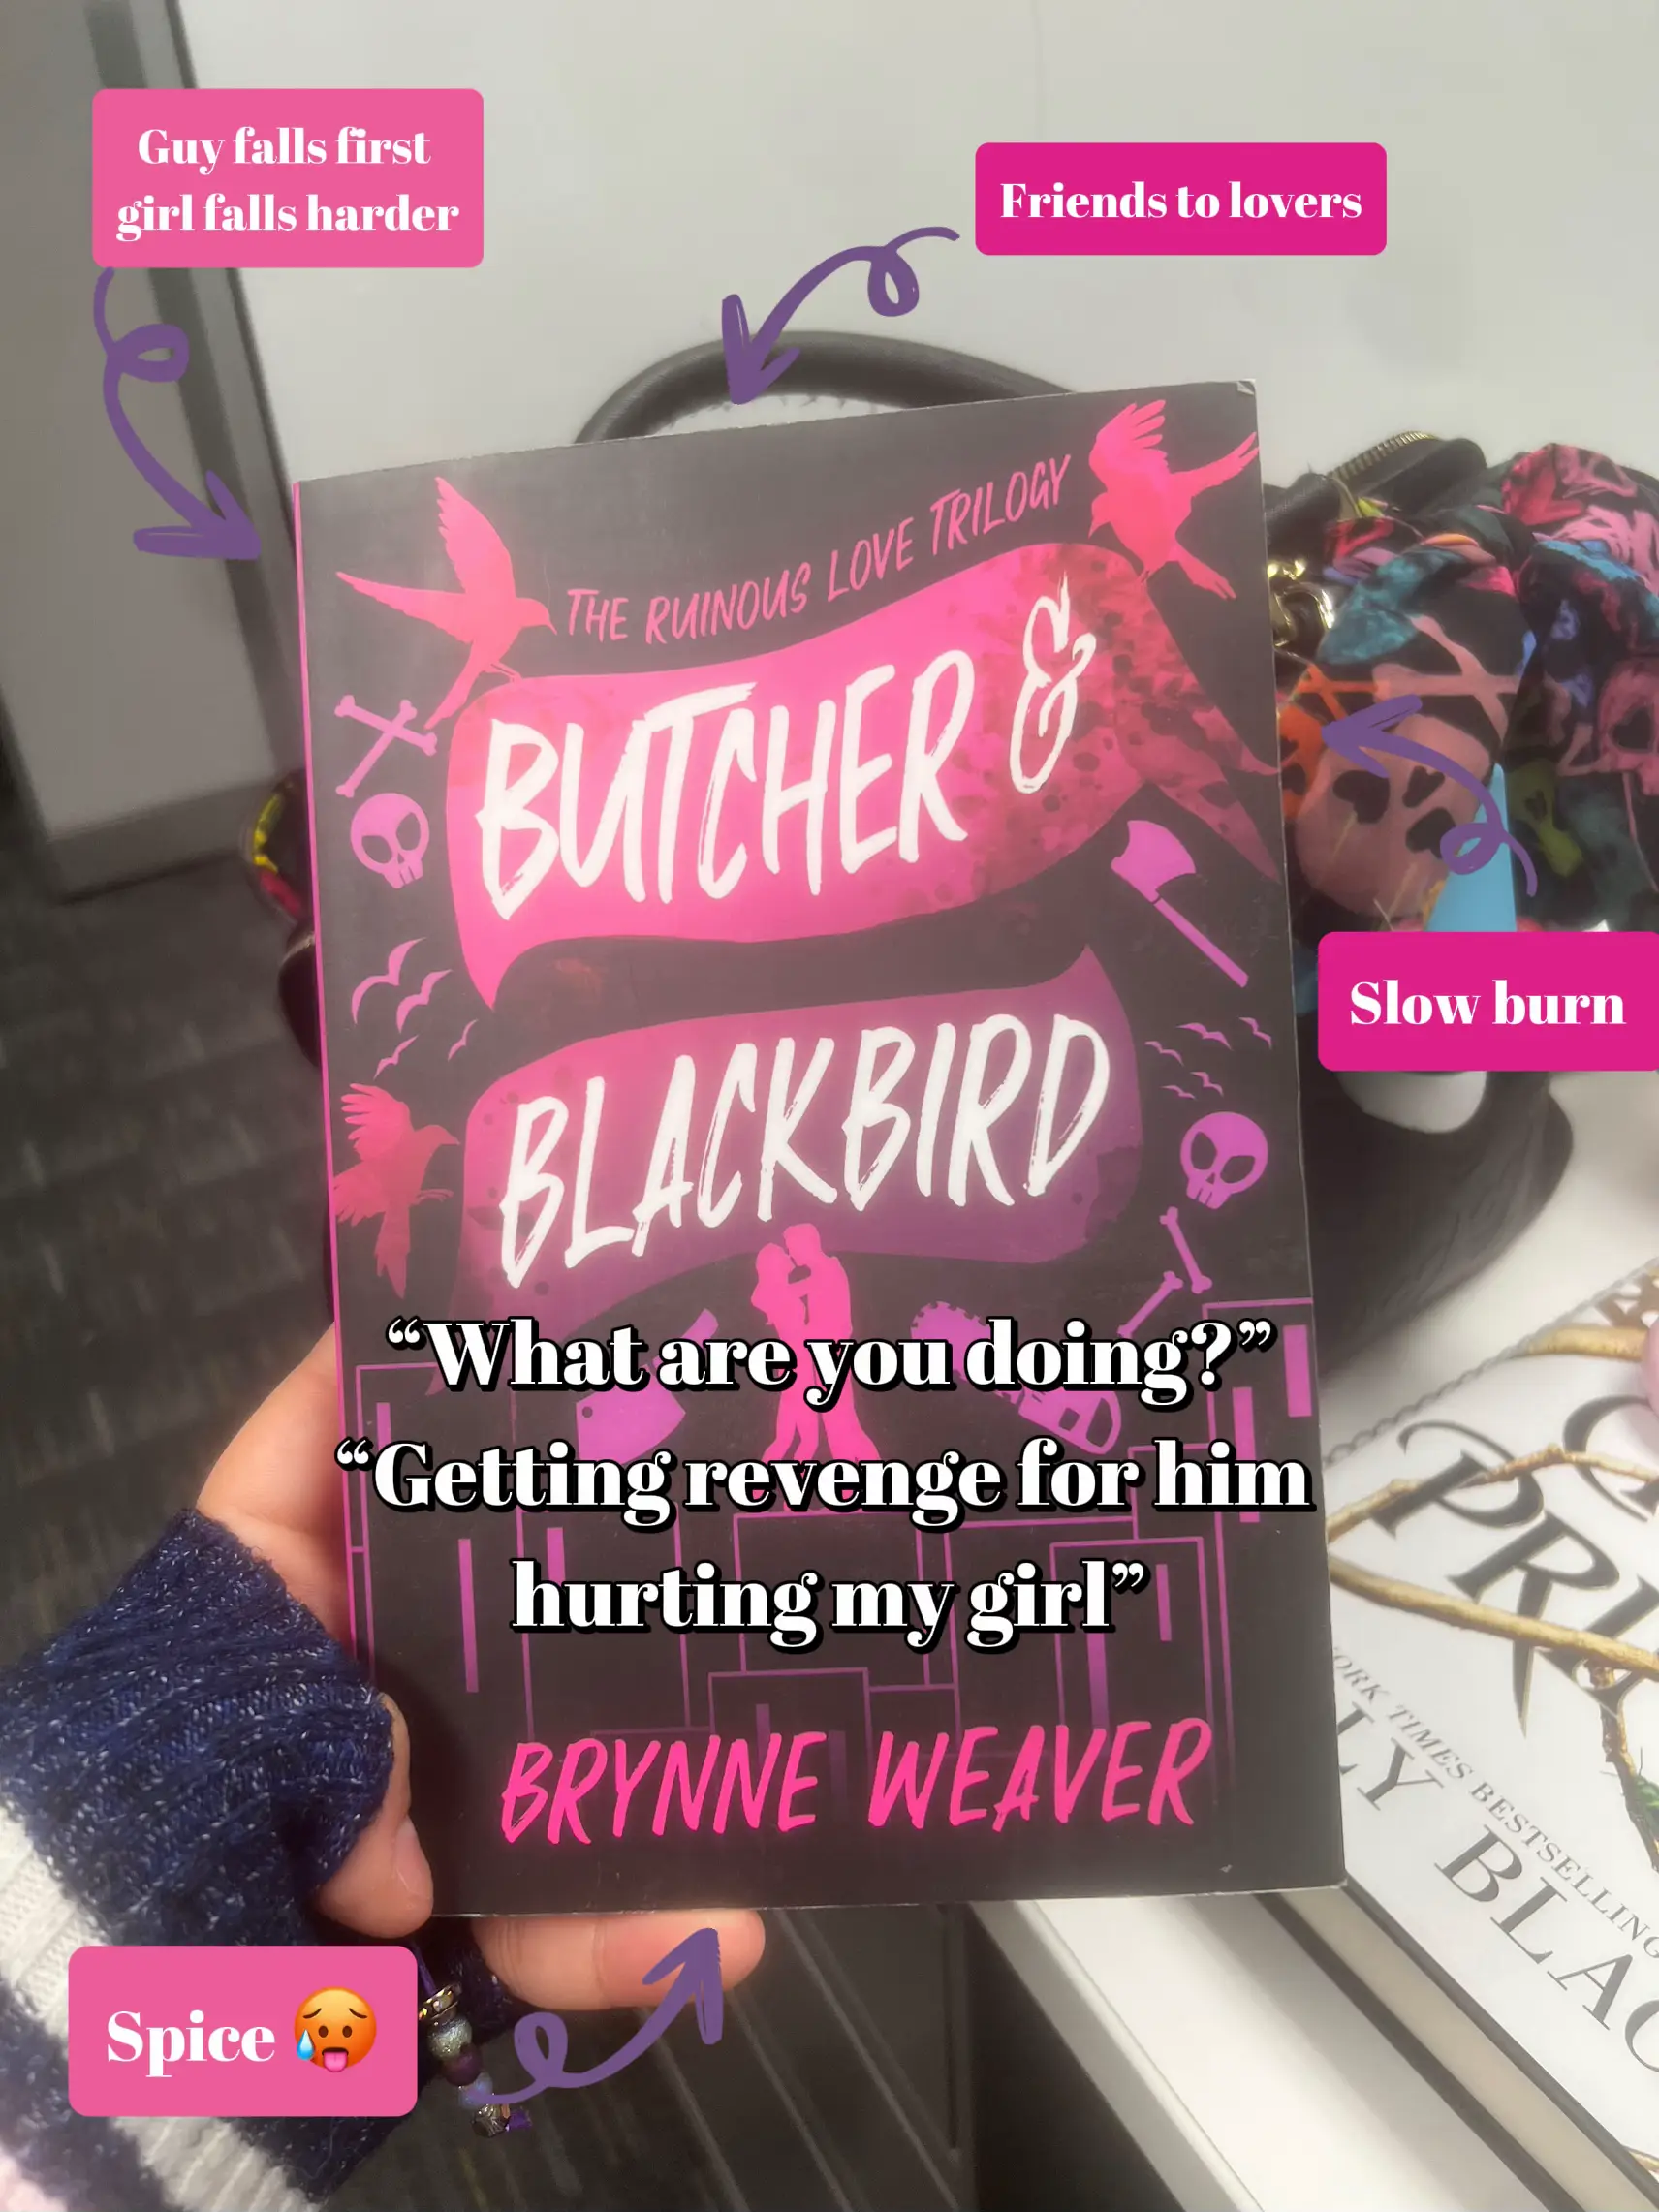 Butcher & Blackbird by Brynne Weaver just me wanting to share my love of  this dark spicy romantic comedy— normally i'm not someone that…